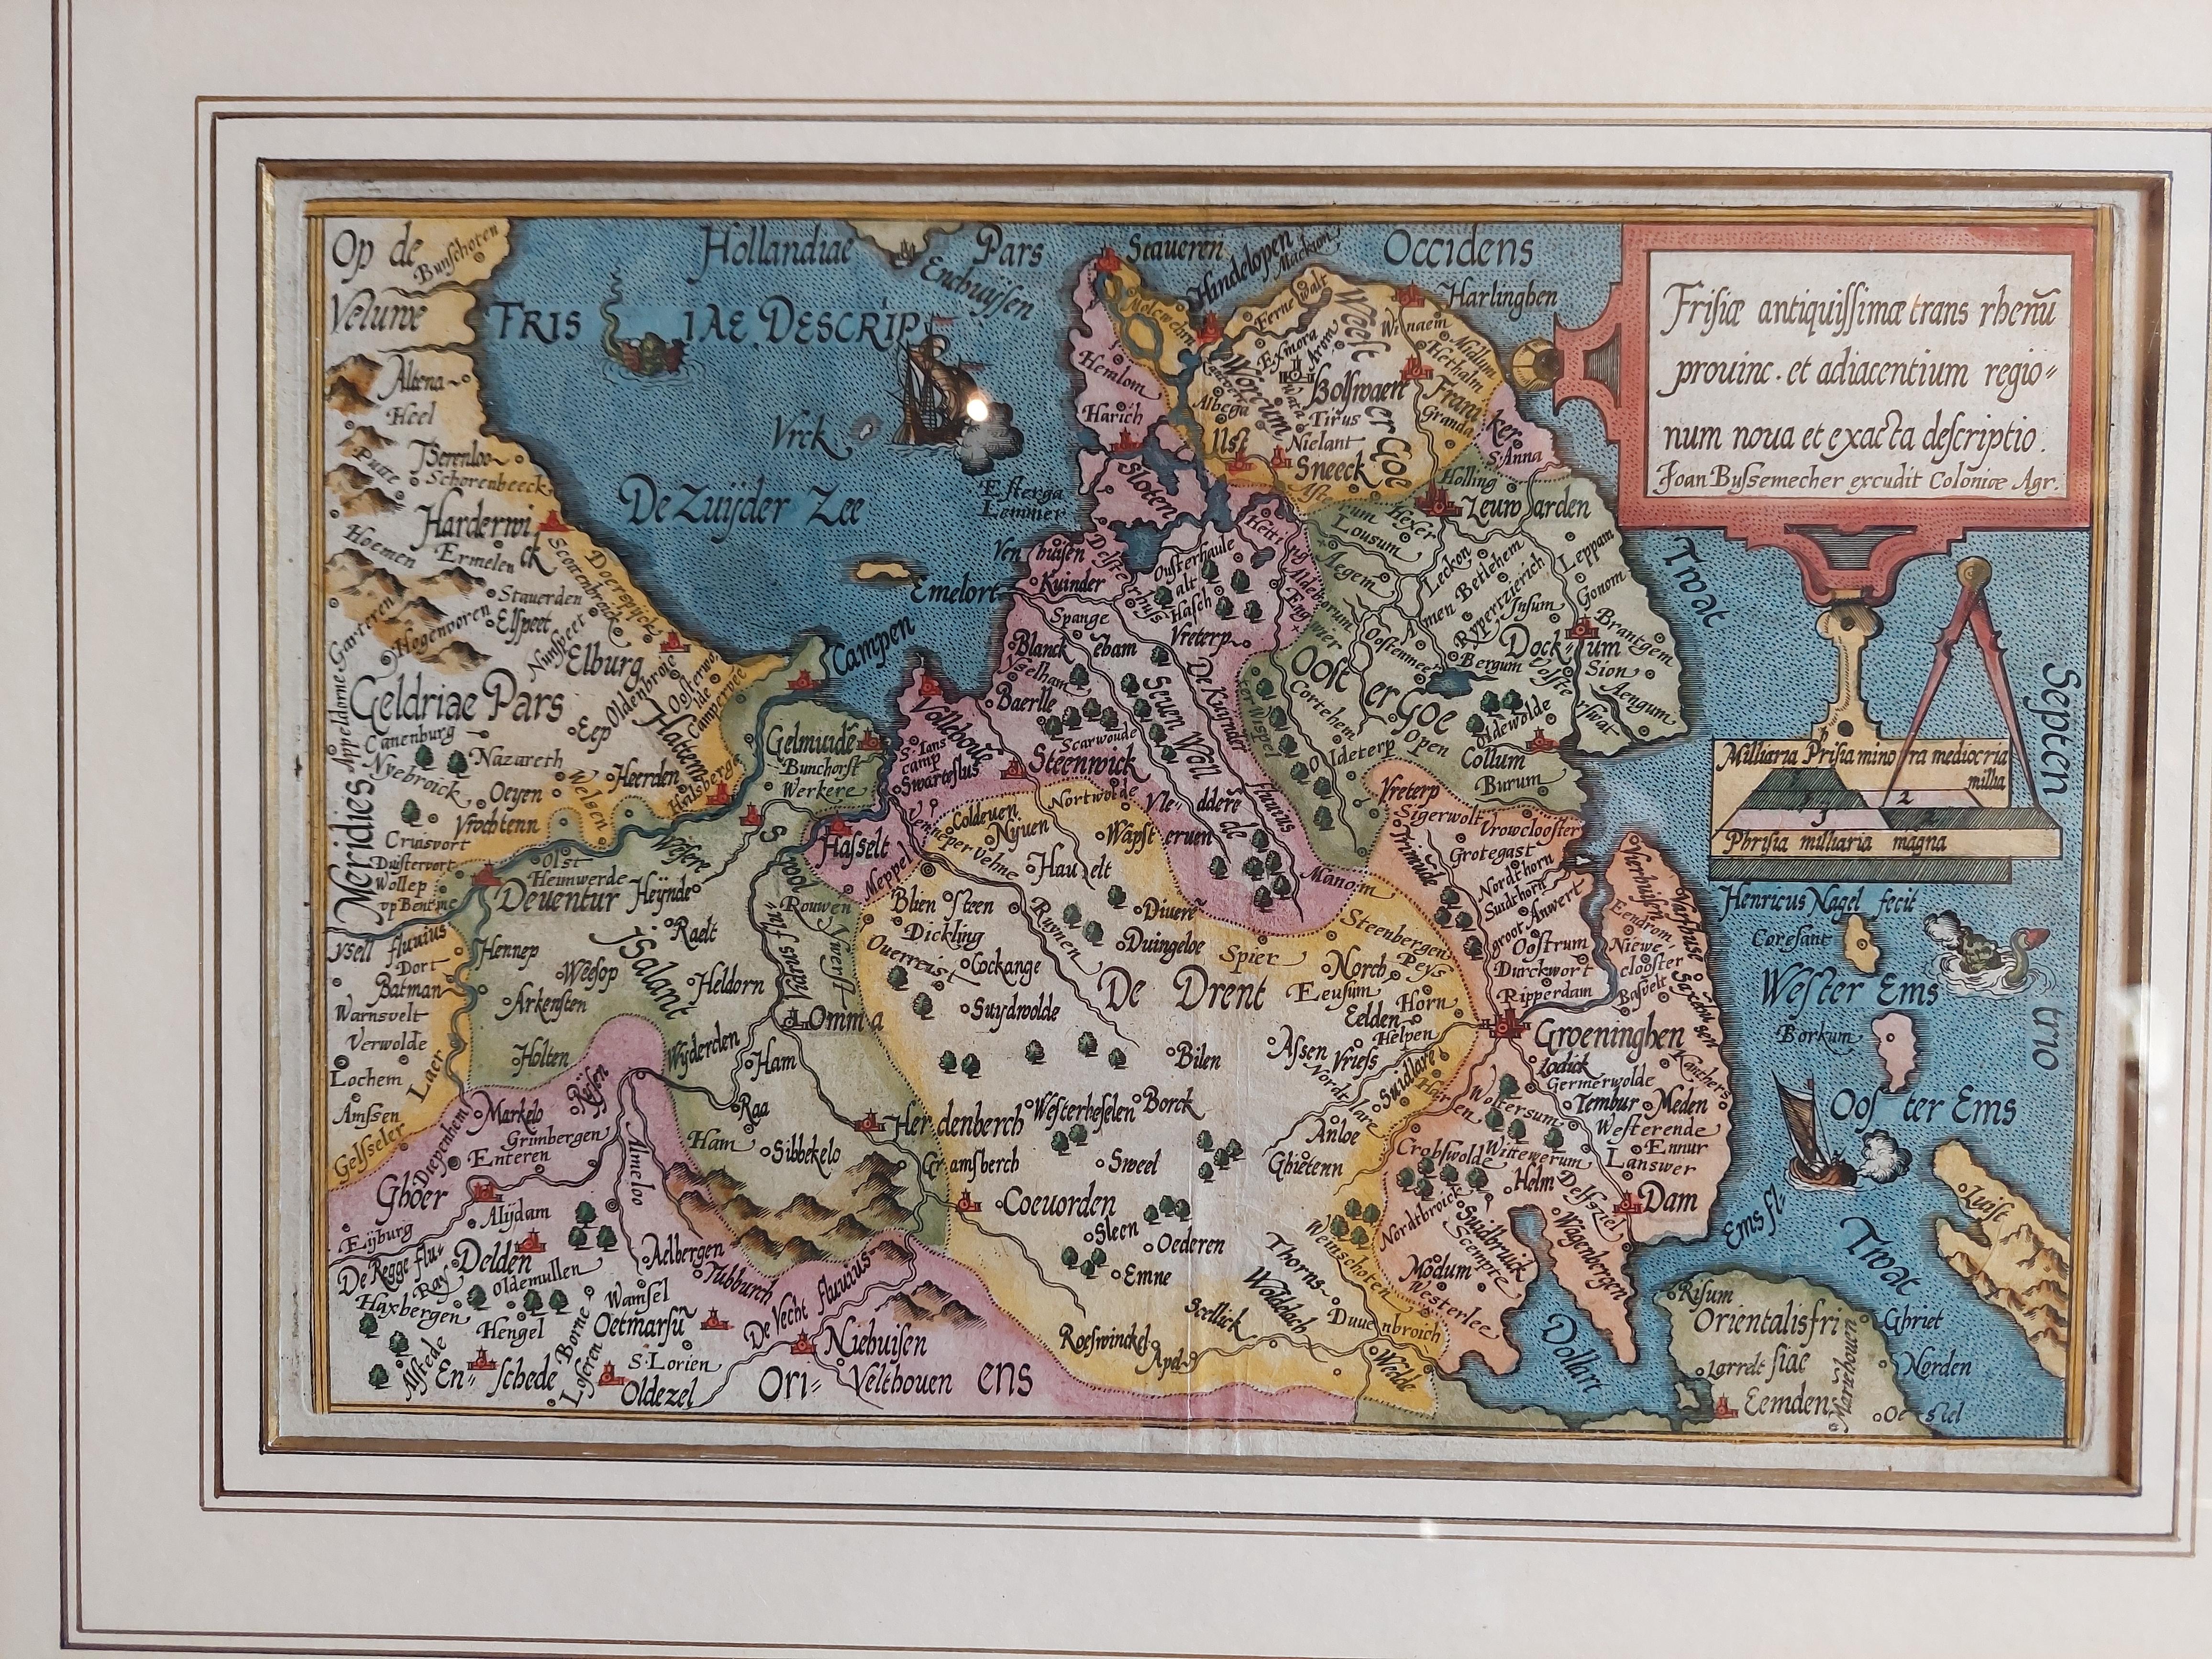 Original antique map titled 'Frisiae Antiquissimae (..)'. Original antique map of Friesland. Published by J. Bussemacher, circa 1592. Artists and Engravers: Bussemacher was active as an engraver, printer and art dealer in Cologne from about 1580 to